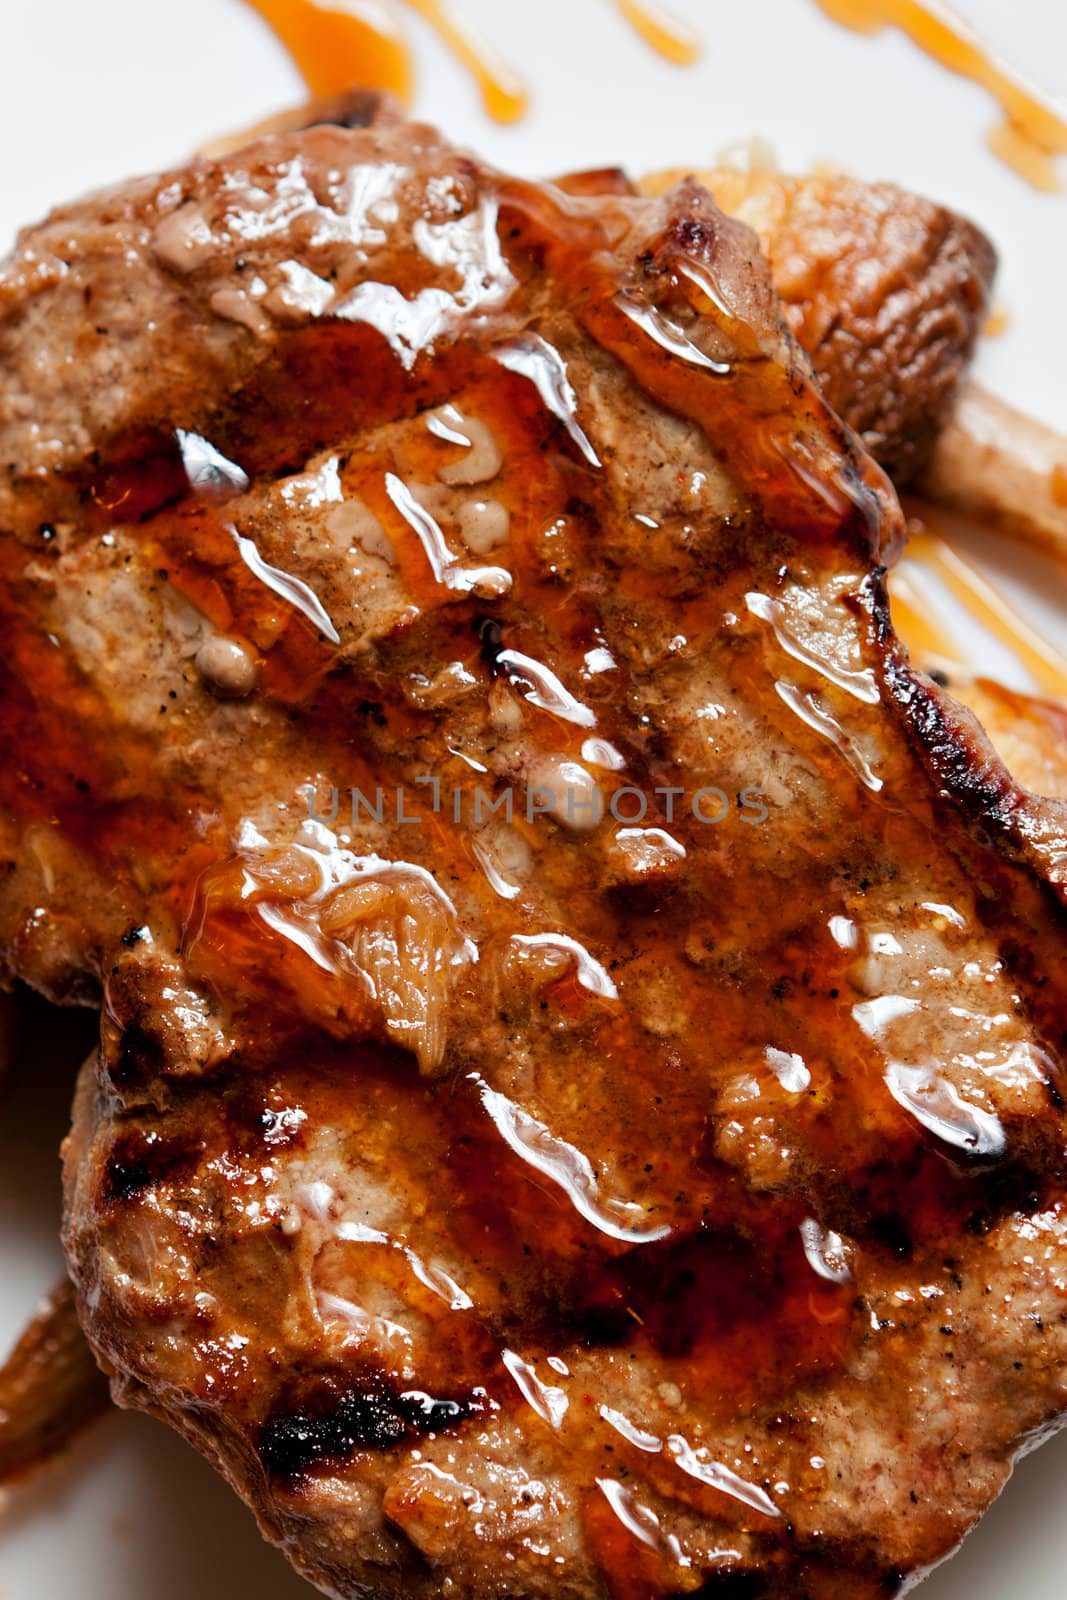 Grilled meat closeup on a white background.